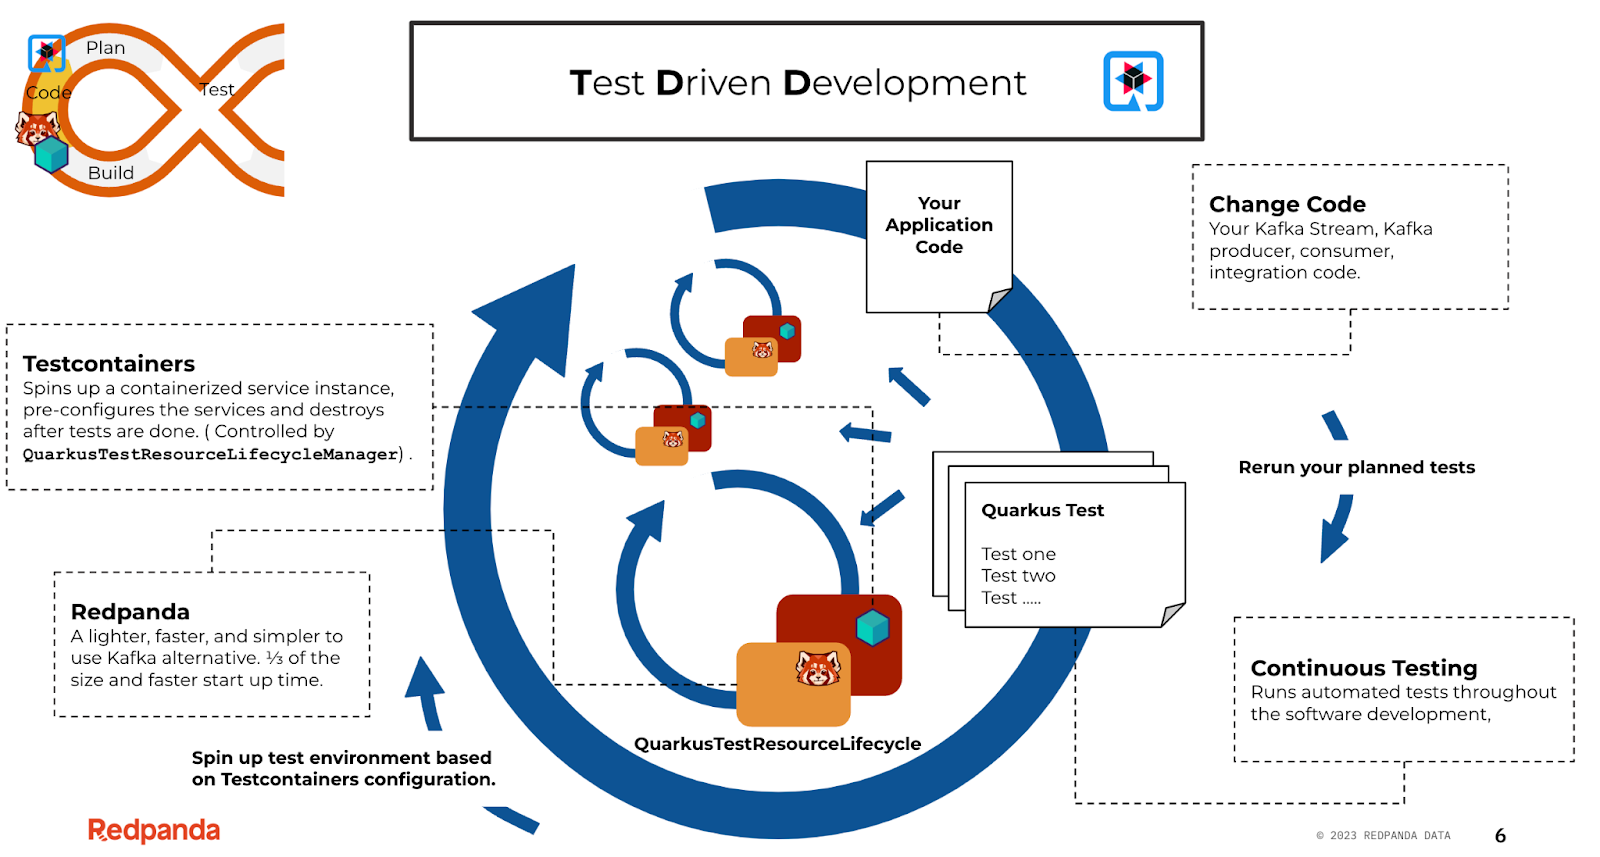 How Redpanda and Testcontainers work for test driven development